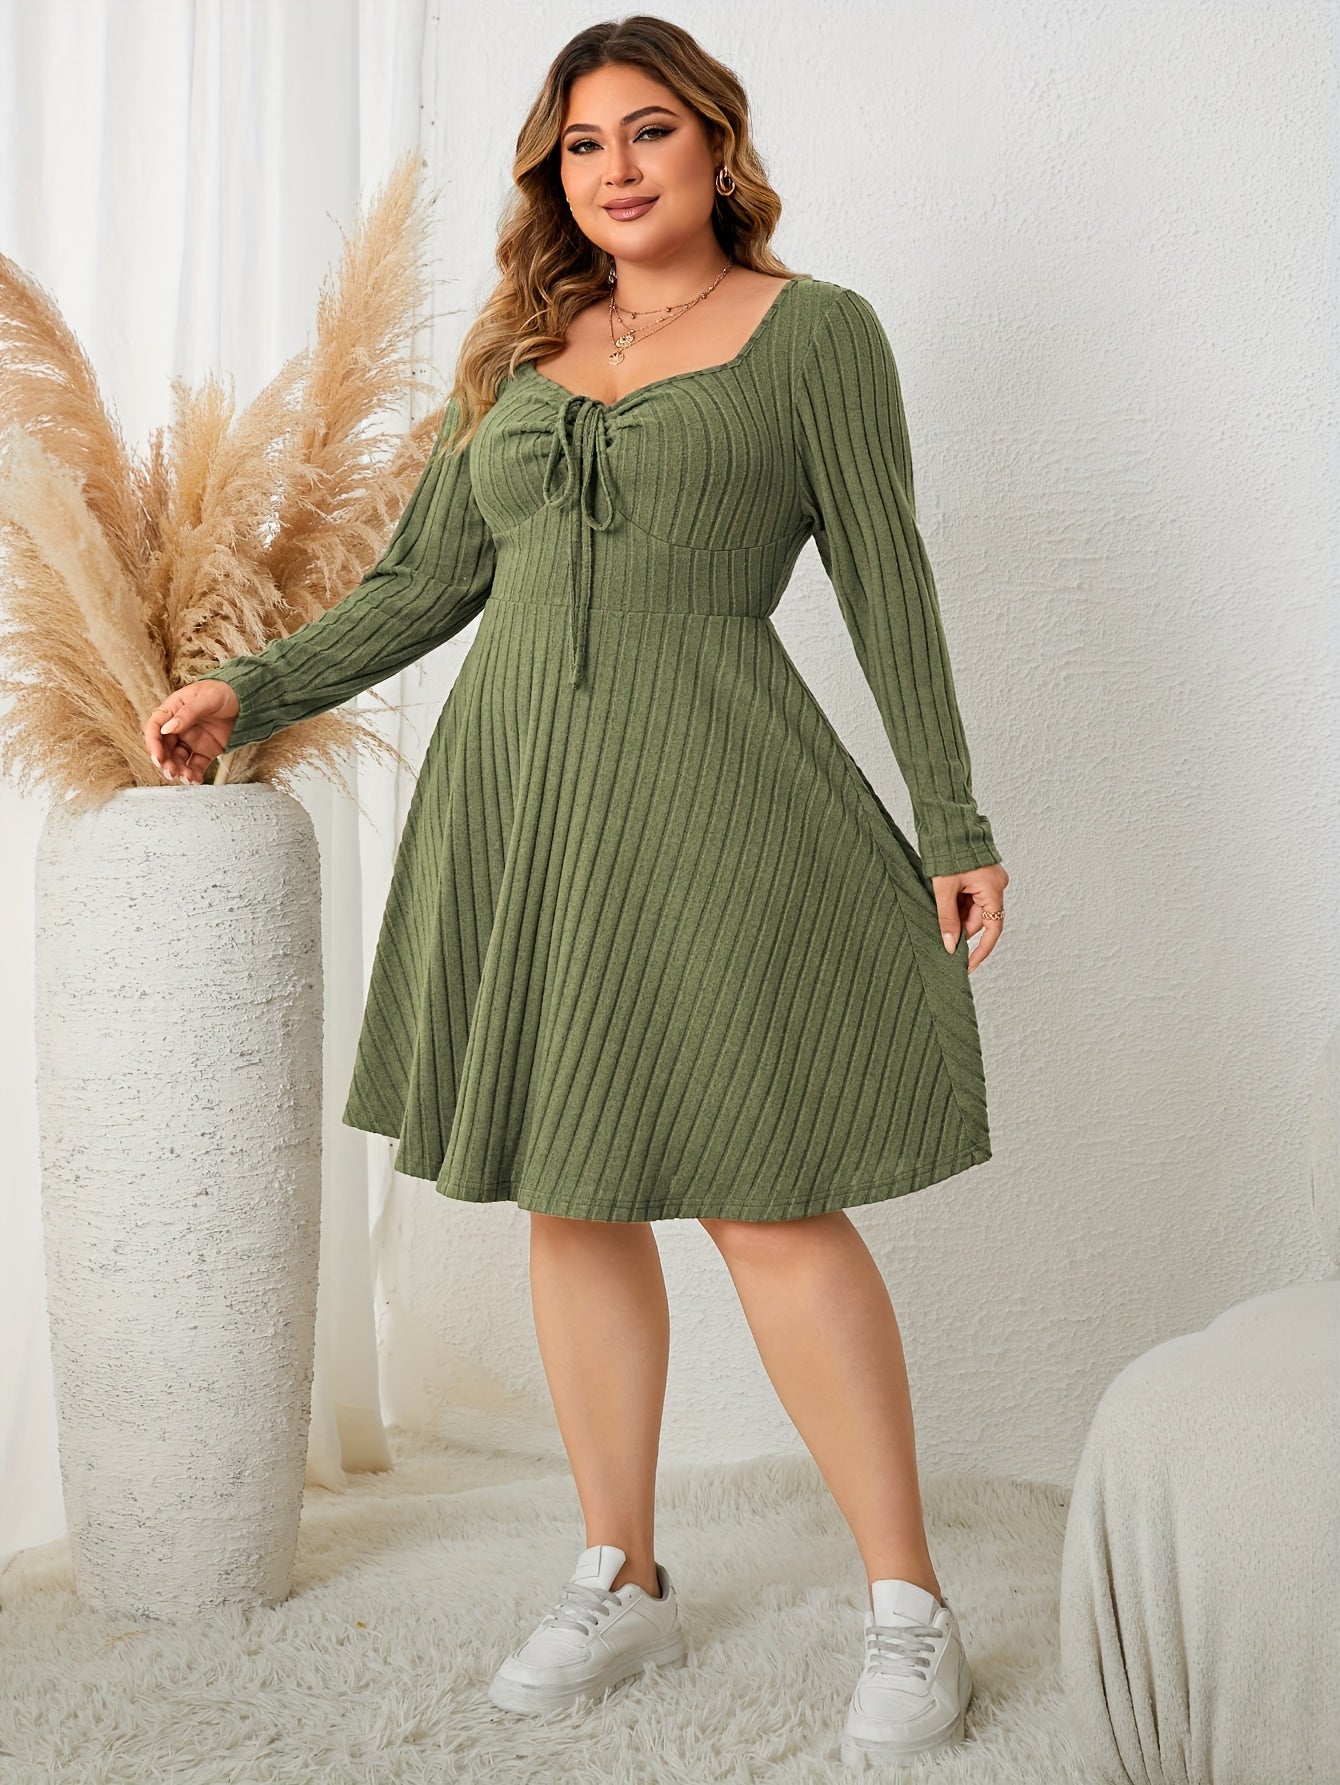 Plus Size Casual Dress, Women's Plus Solid Ribbed Ruched Tie Front Long Sleeve V Neck Knee Length Dress